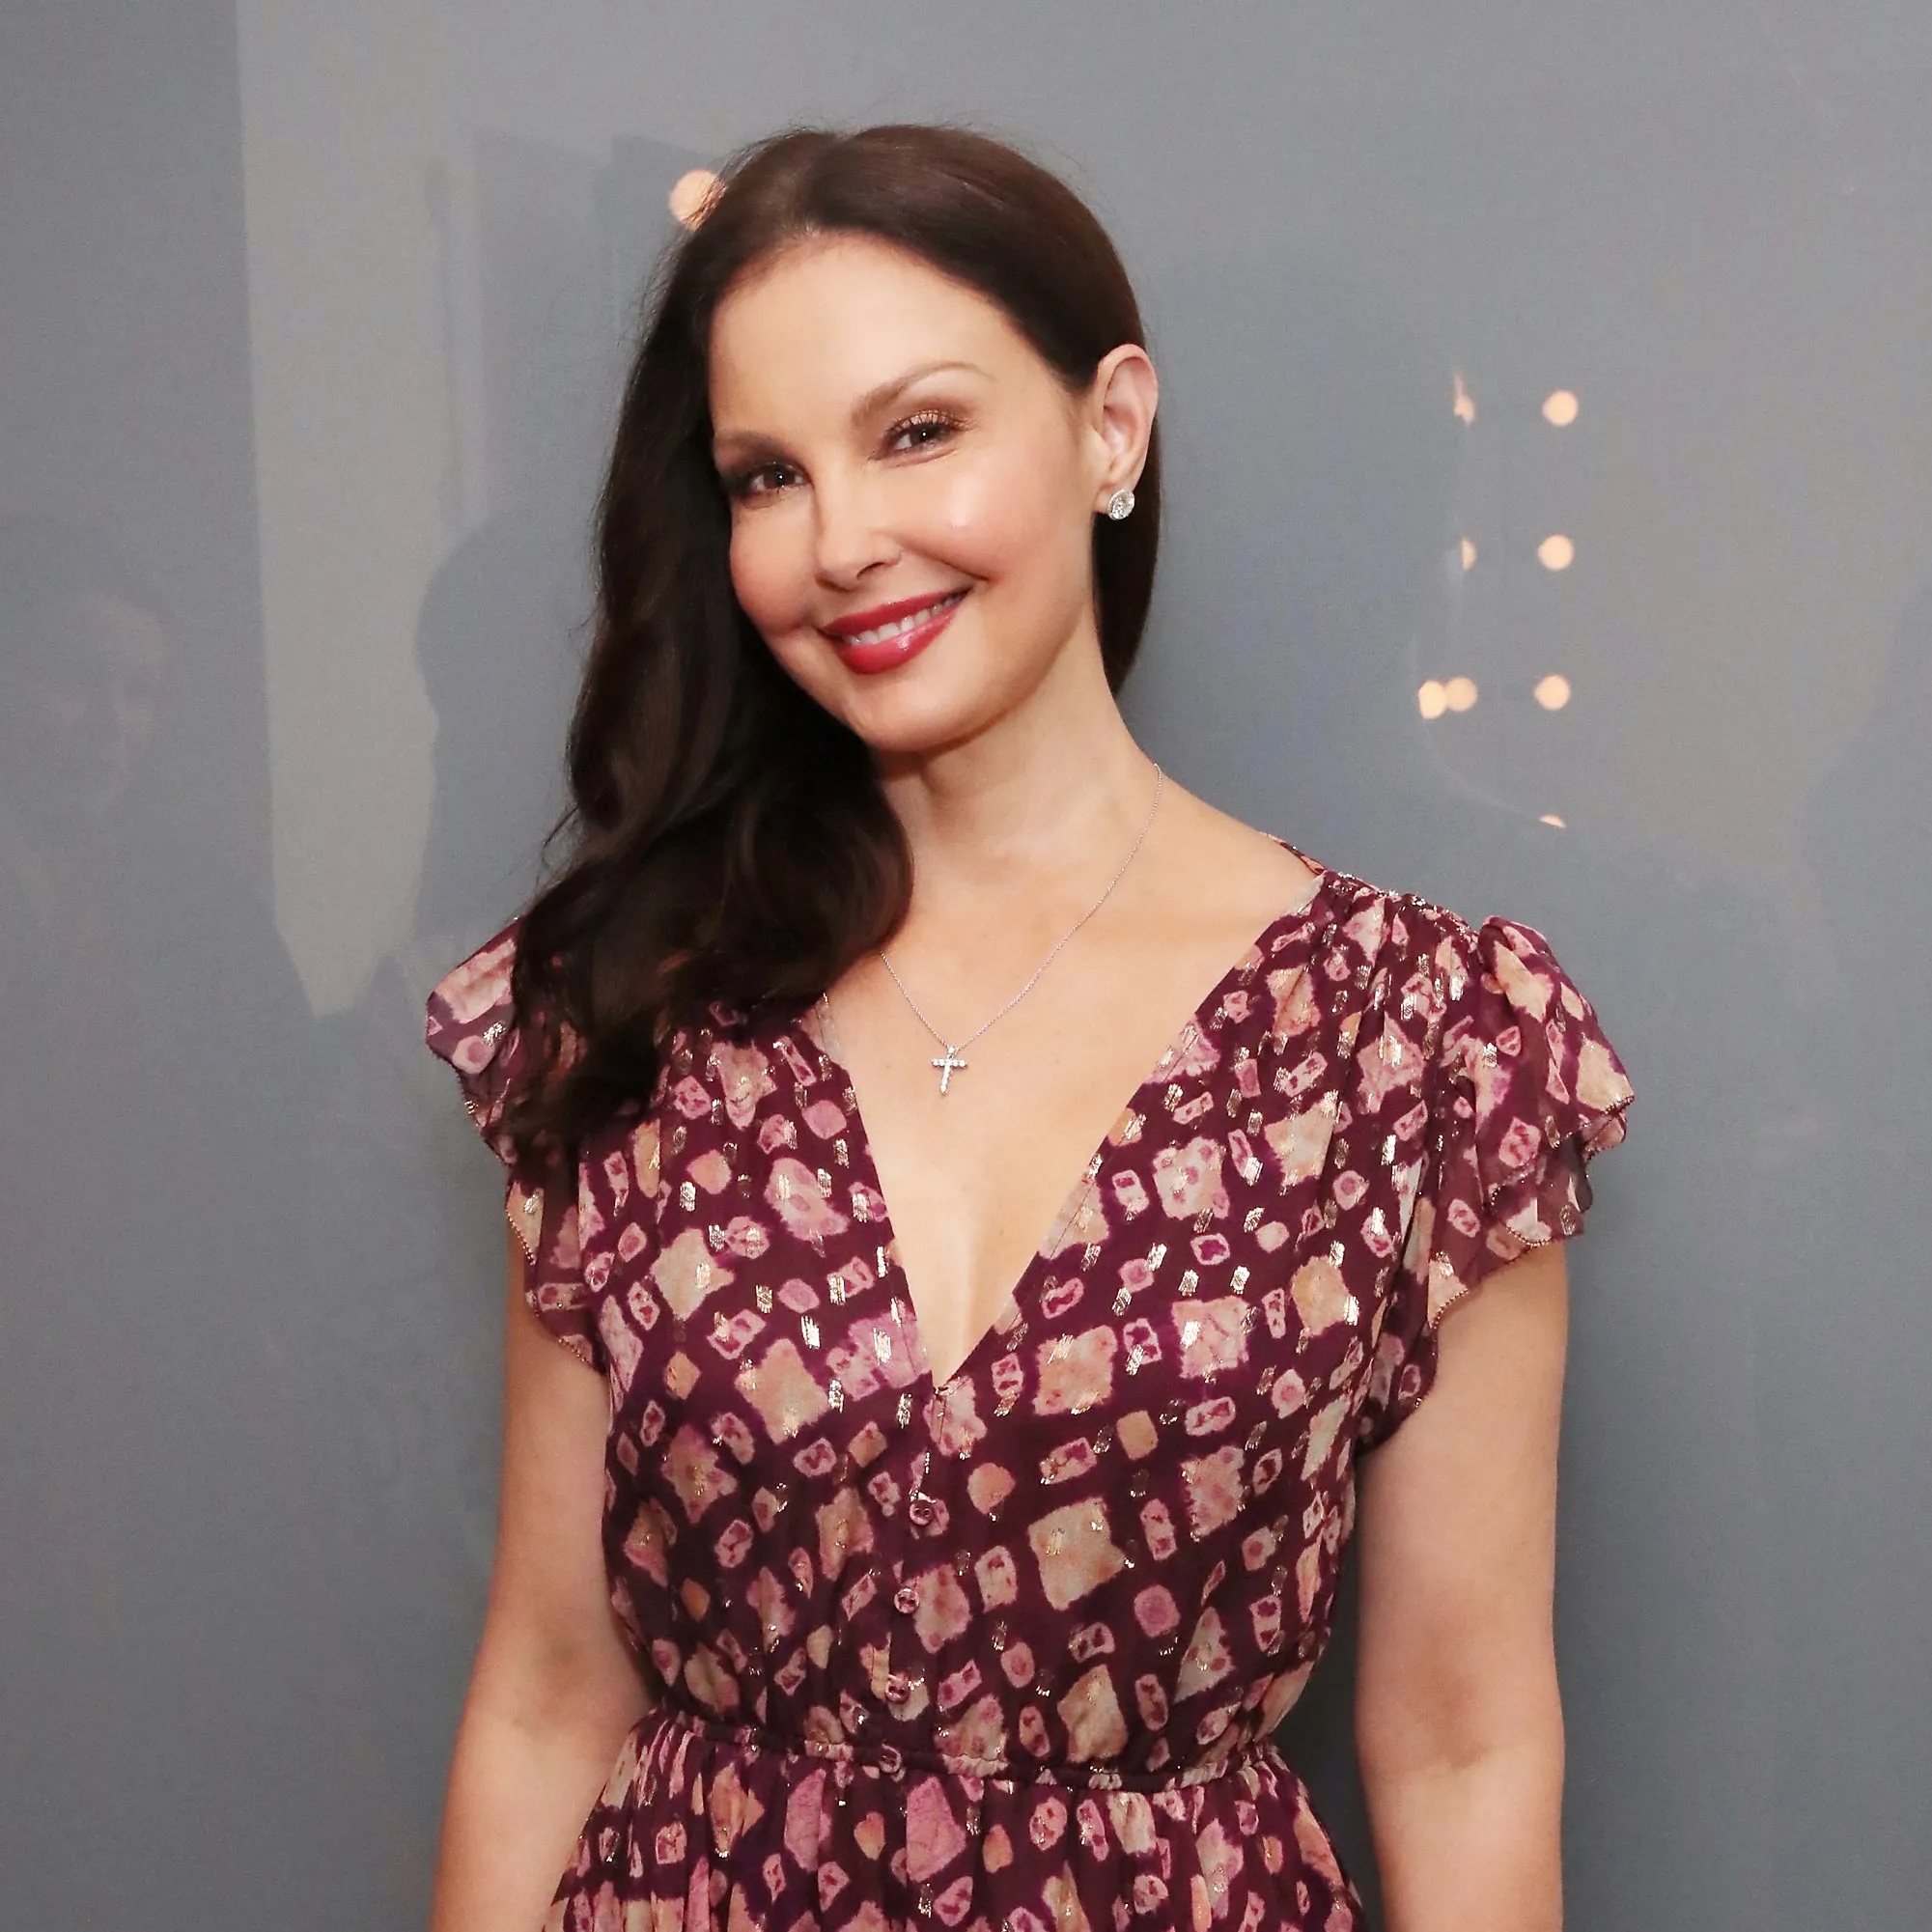 Ashley Judd Face Accident: What Really Happened To Ashley Judd?